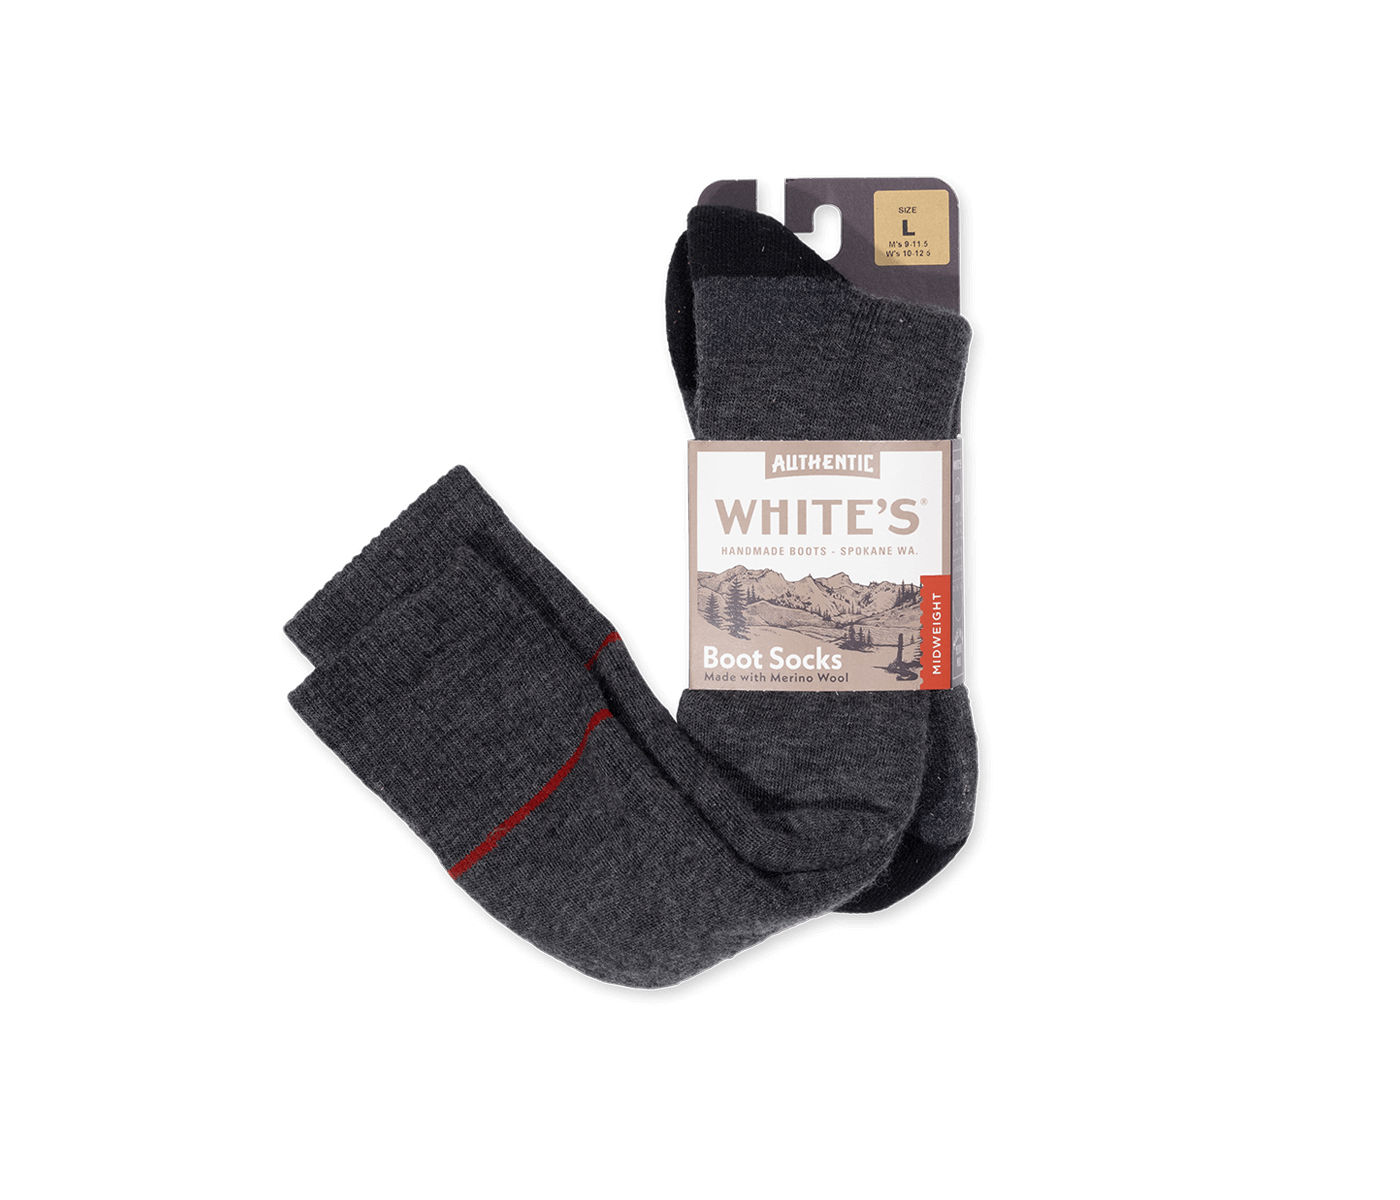 White's Midweight Over the Calf Sock: White's Boots, Inc.